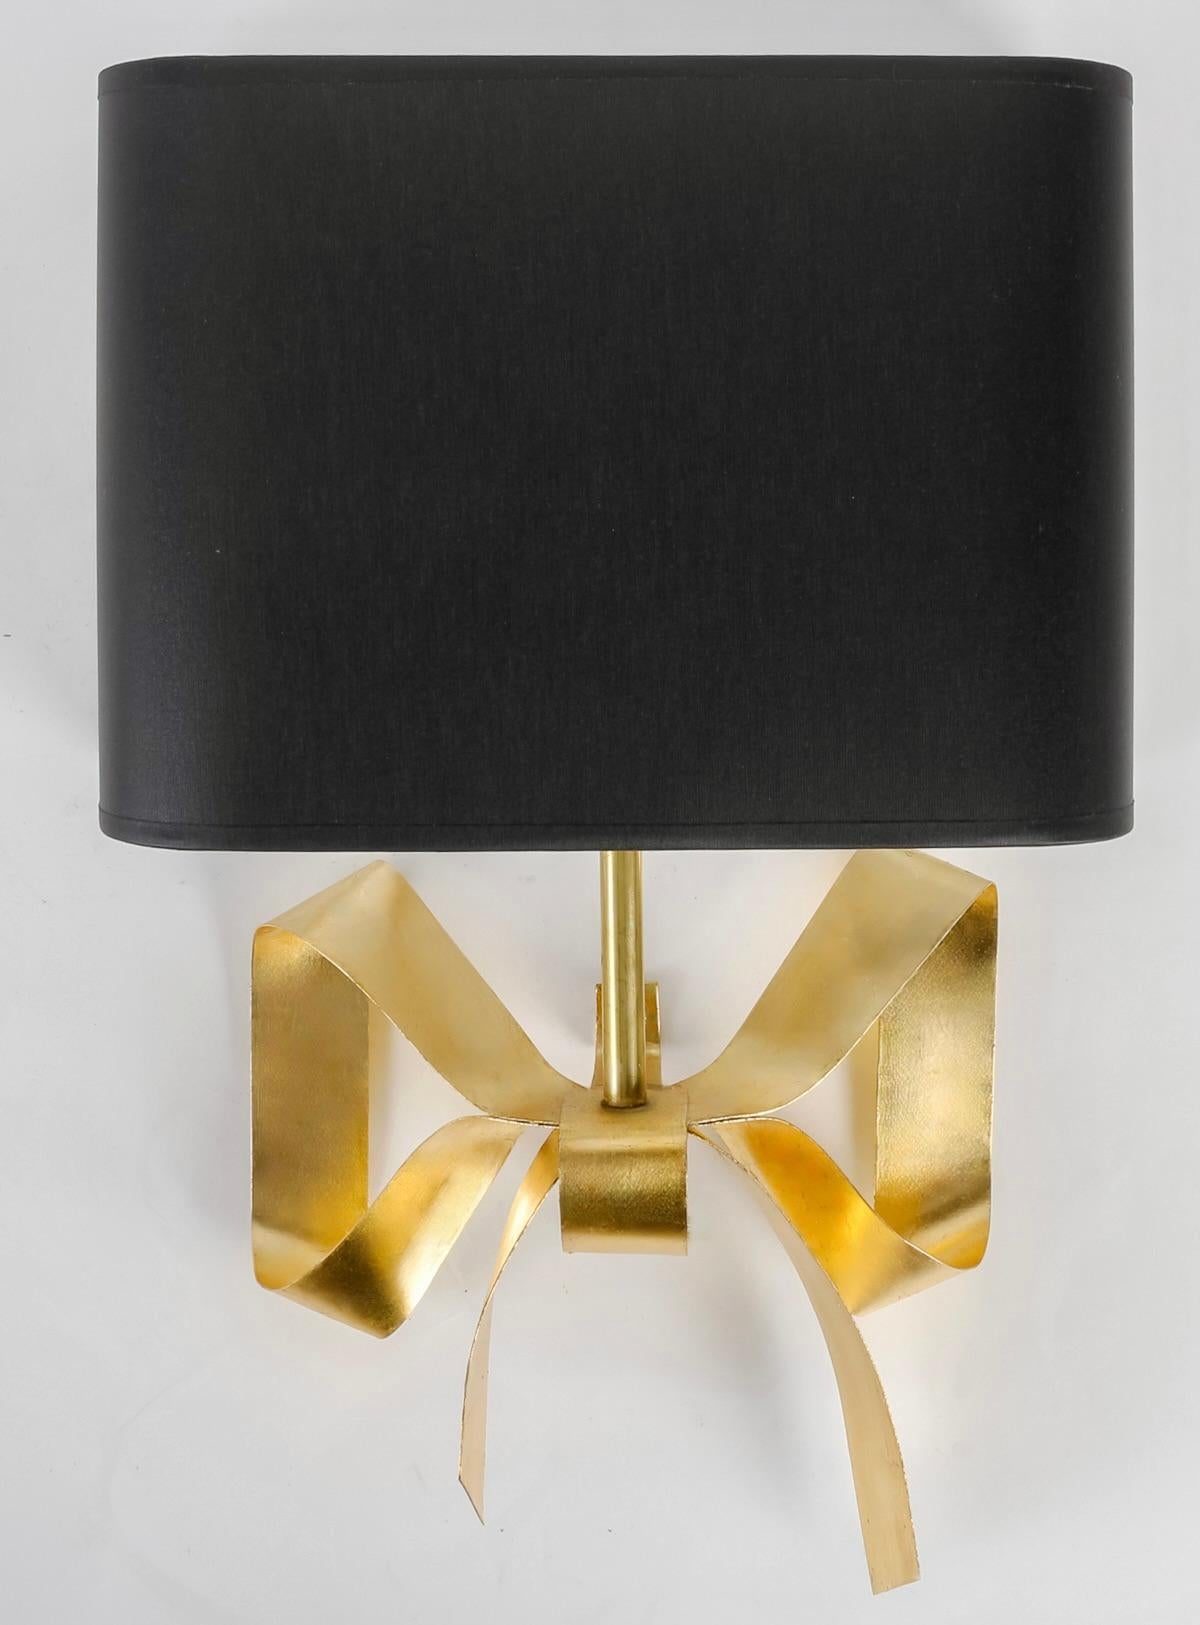 Composed of a wall bracket forming a half-loop at the back of the sconce, on which rests a pretty handmade bow, all in gilded leaf metal.
The sconce is clad with a black cotton shade held in place by a gilded brass rod connected to the base at the